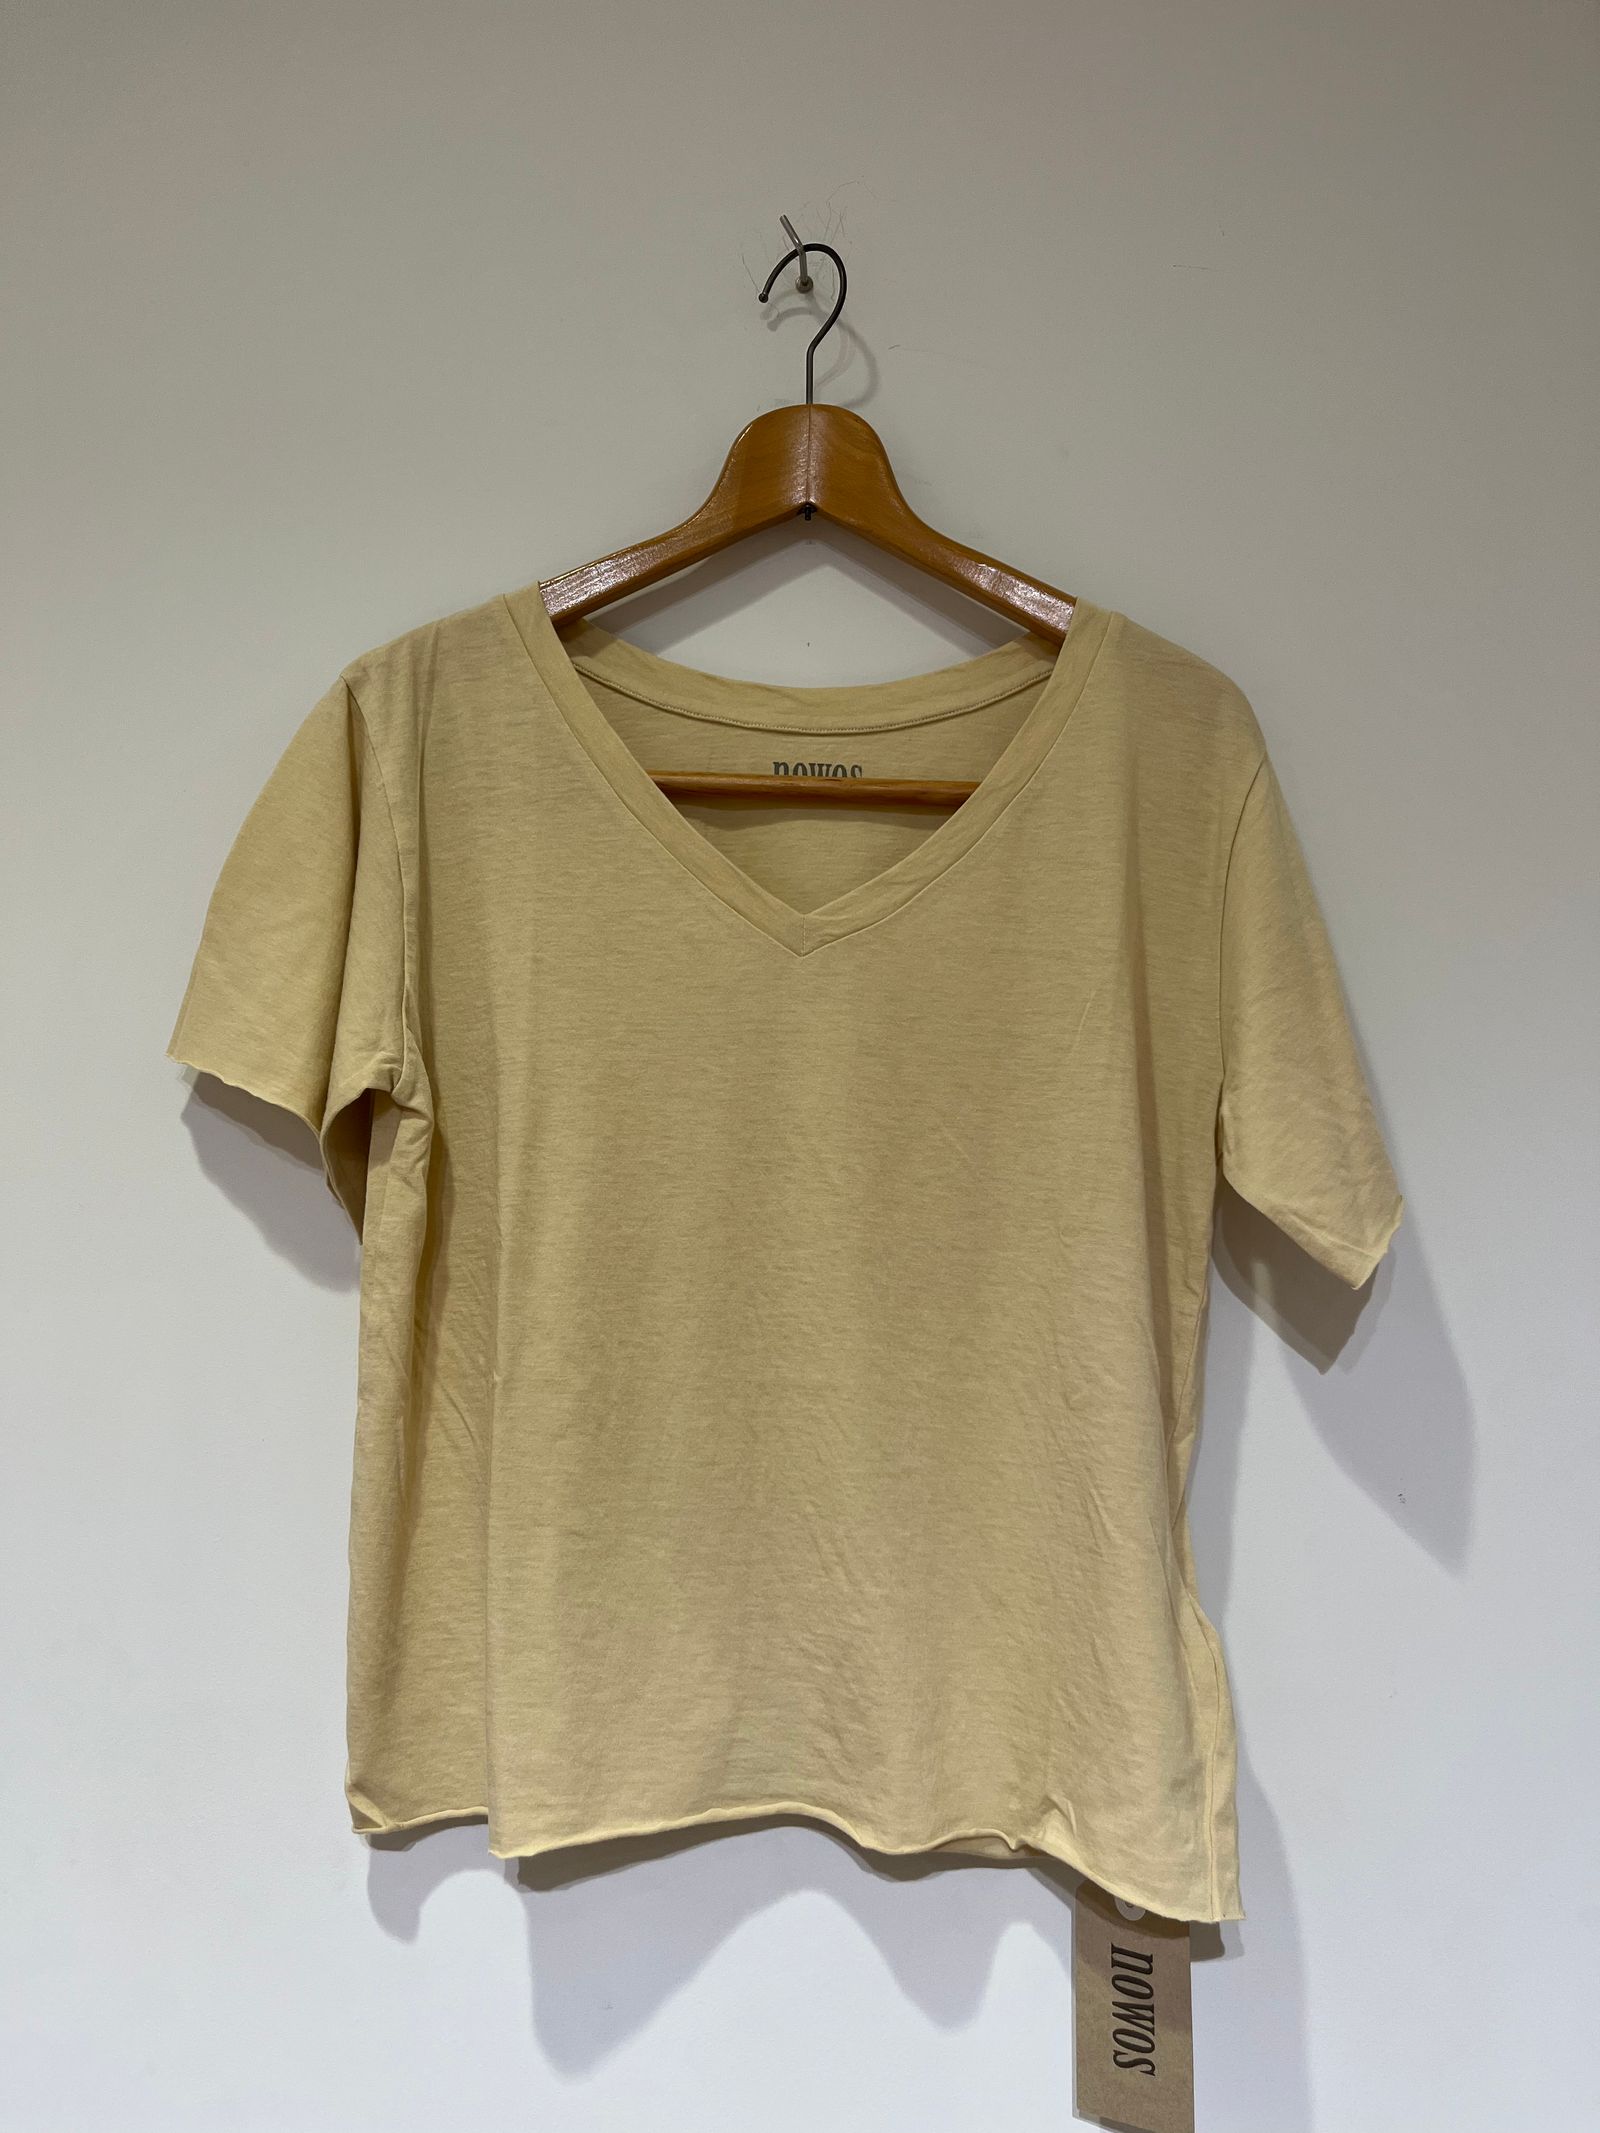 nowos - COTTON SILK V NECK T-SHIRT nowos コットンシルクV